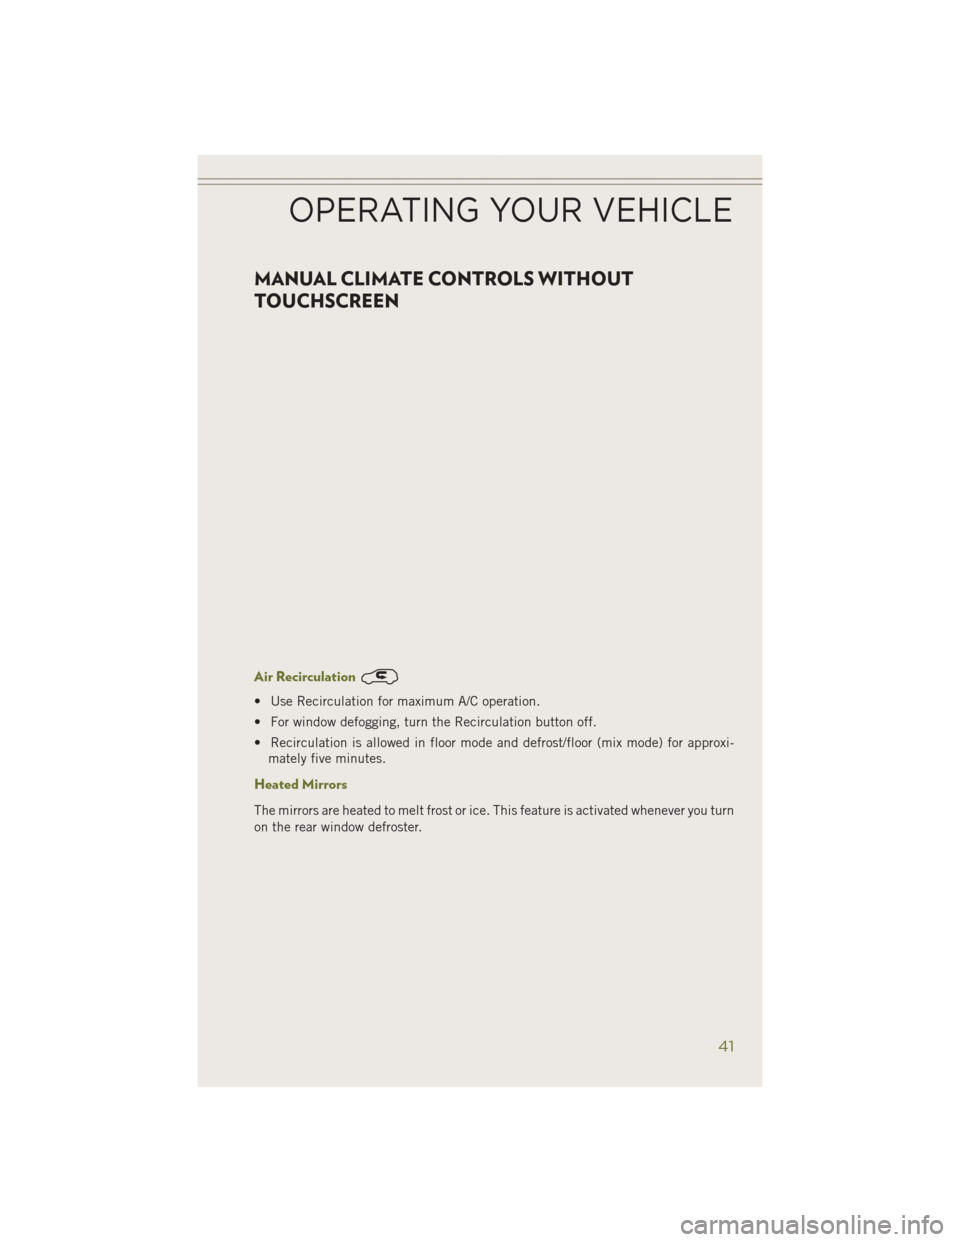 JEEP CHEROKEE 2014 KL / 5.G Service Manual MANUAL CLIMATE CONTROLS WITHOUT
TOUCHSCREEN
Air Recirculation
• Use Recirculation for maximum A/C operation.
• For window defogging, turn the Recirculation button off.
• Recirculation is allowed